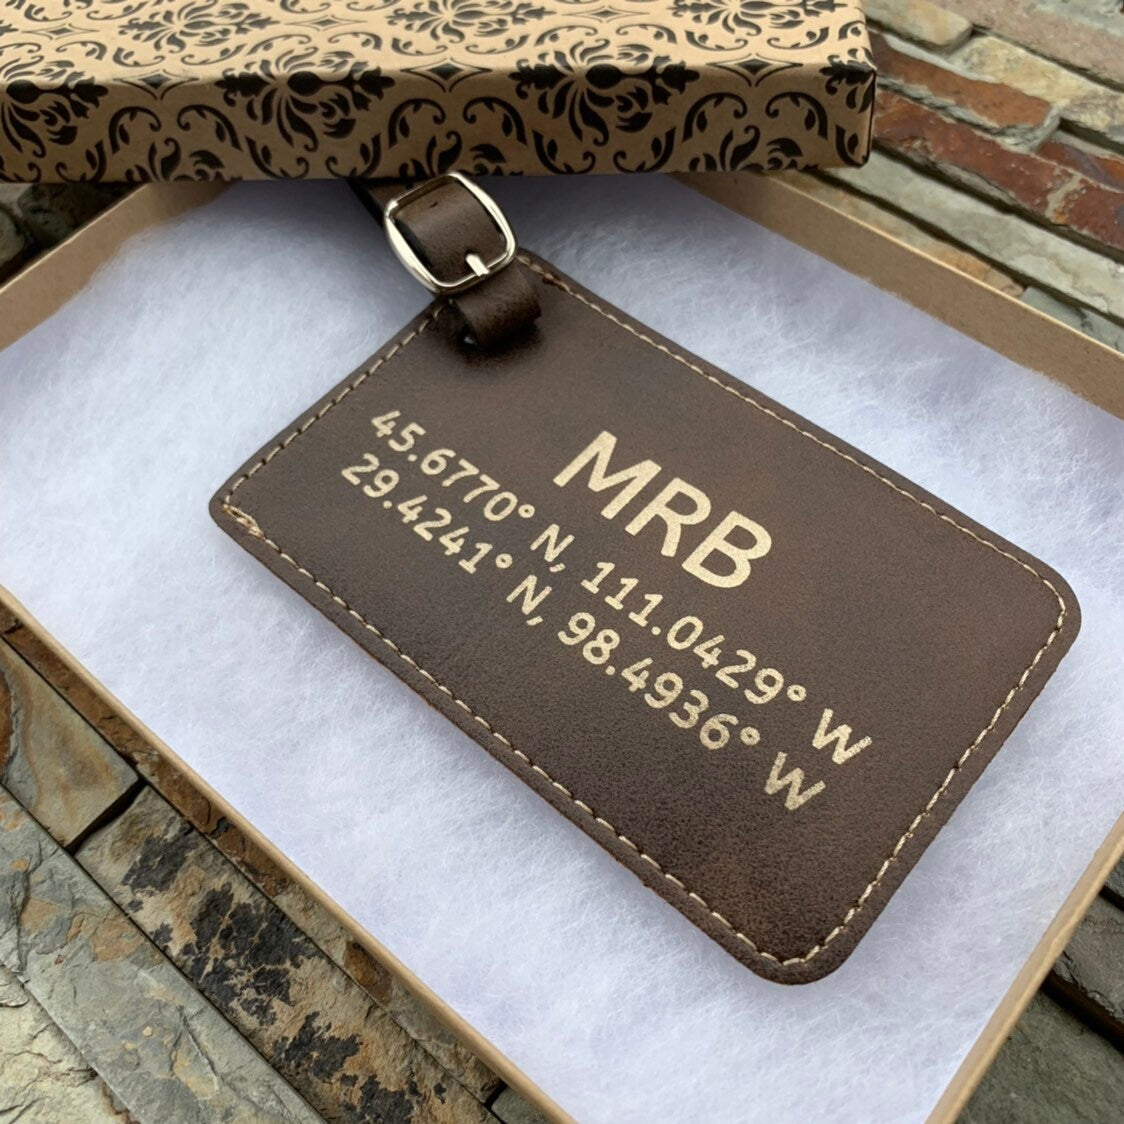 Custom Luggage Tag, Personalized Leather Luggage Tag, Luggage Tags Personalized, Monogram Luggage Tag, Engraved Luggage Tag, Luggage Tags